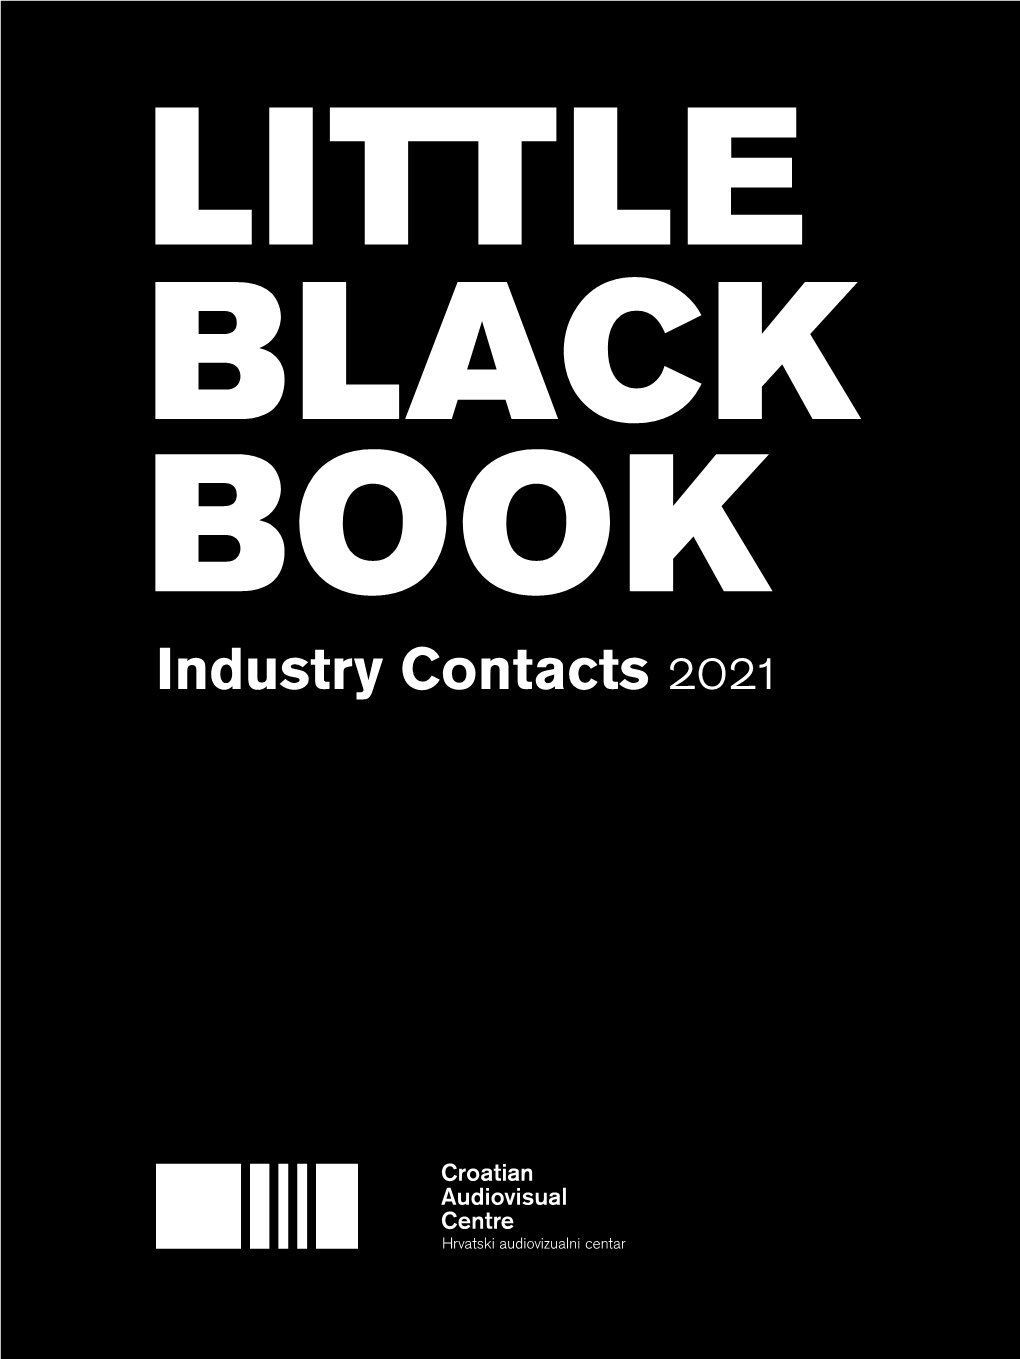 Industry Contacts 2021 Industry Contacts 2021 Contents